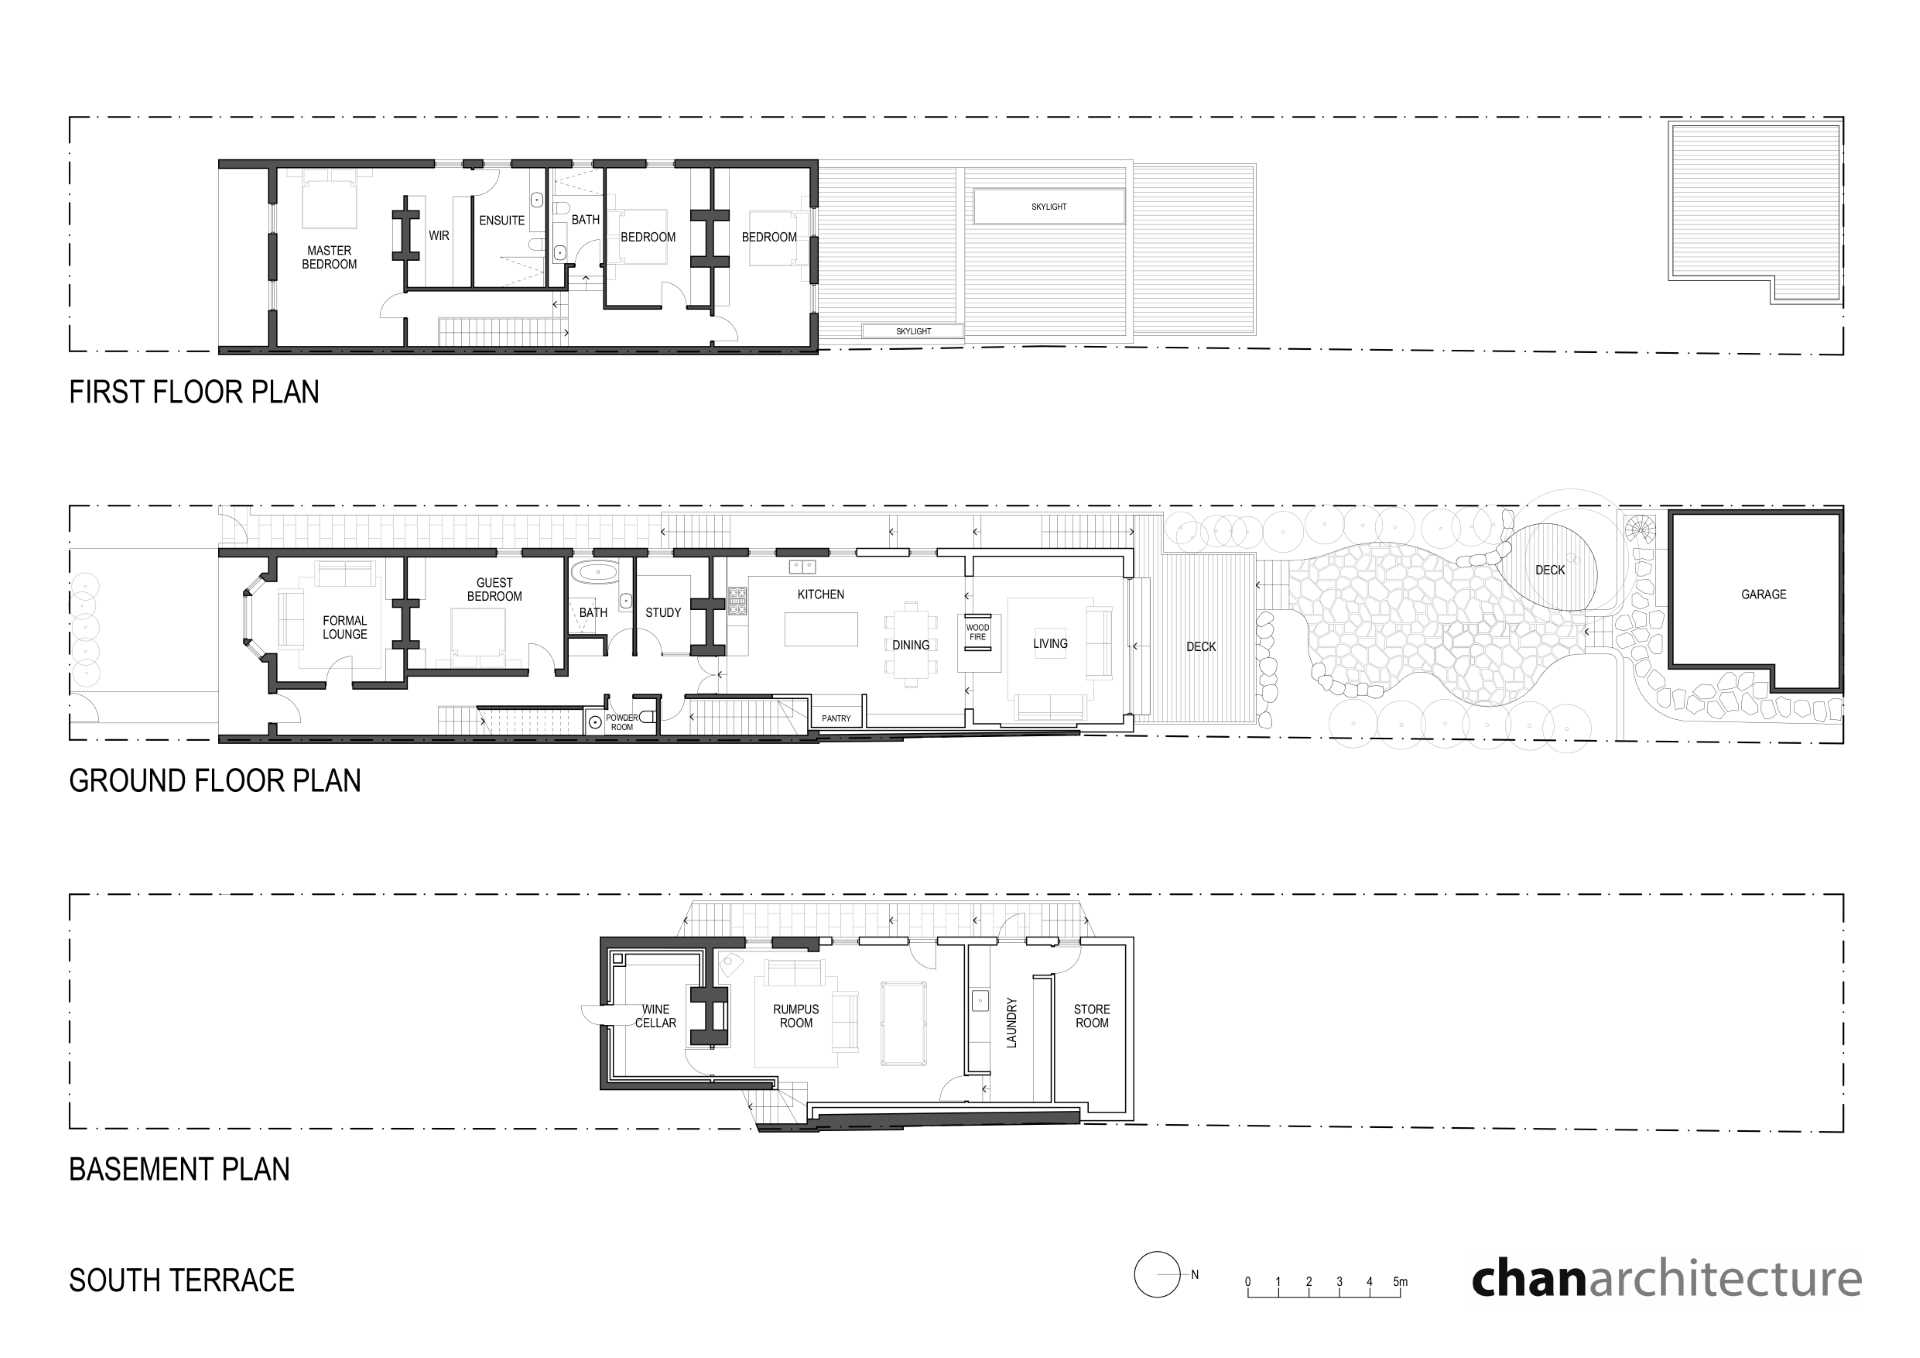 The floor plan of a renovated terrace house in Australia.